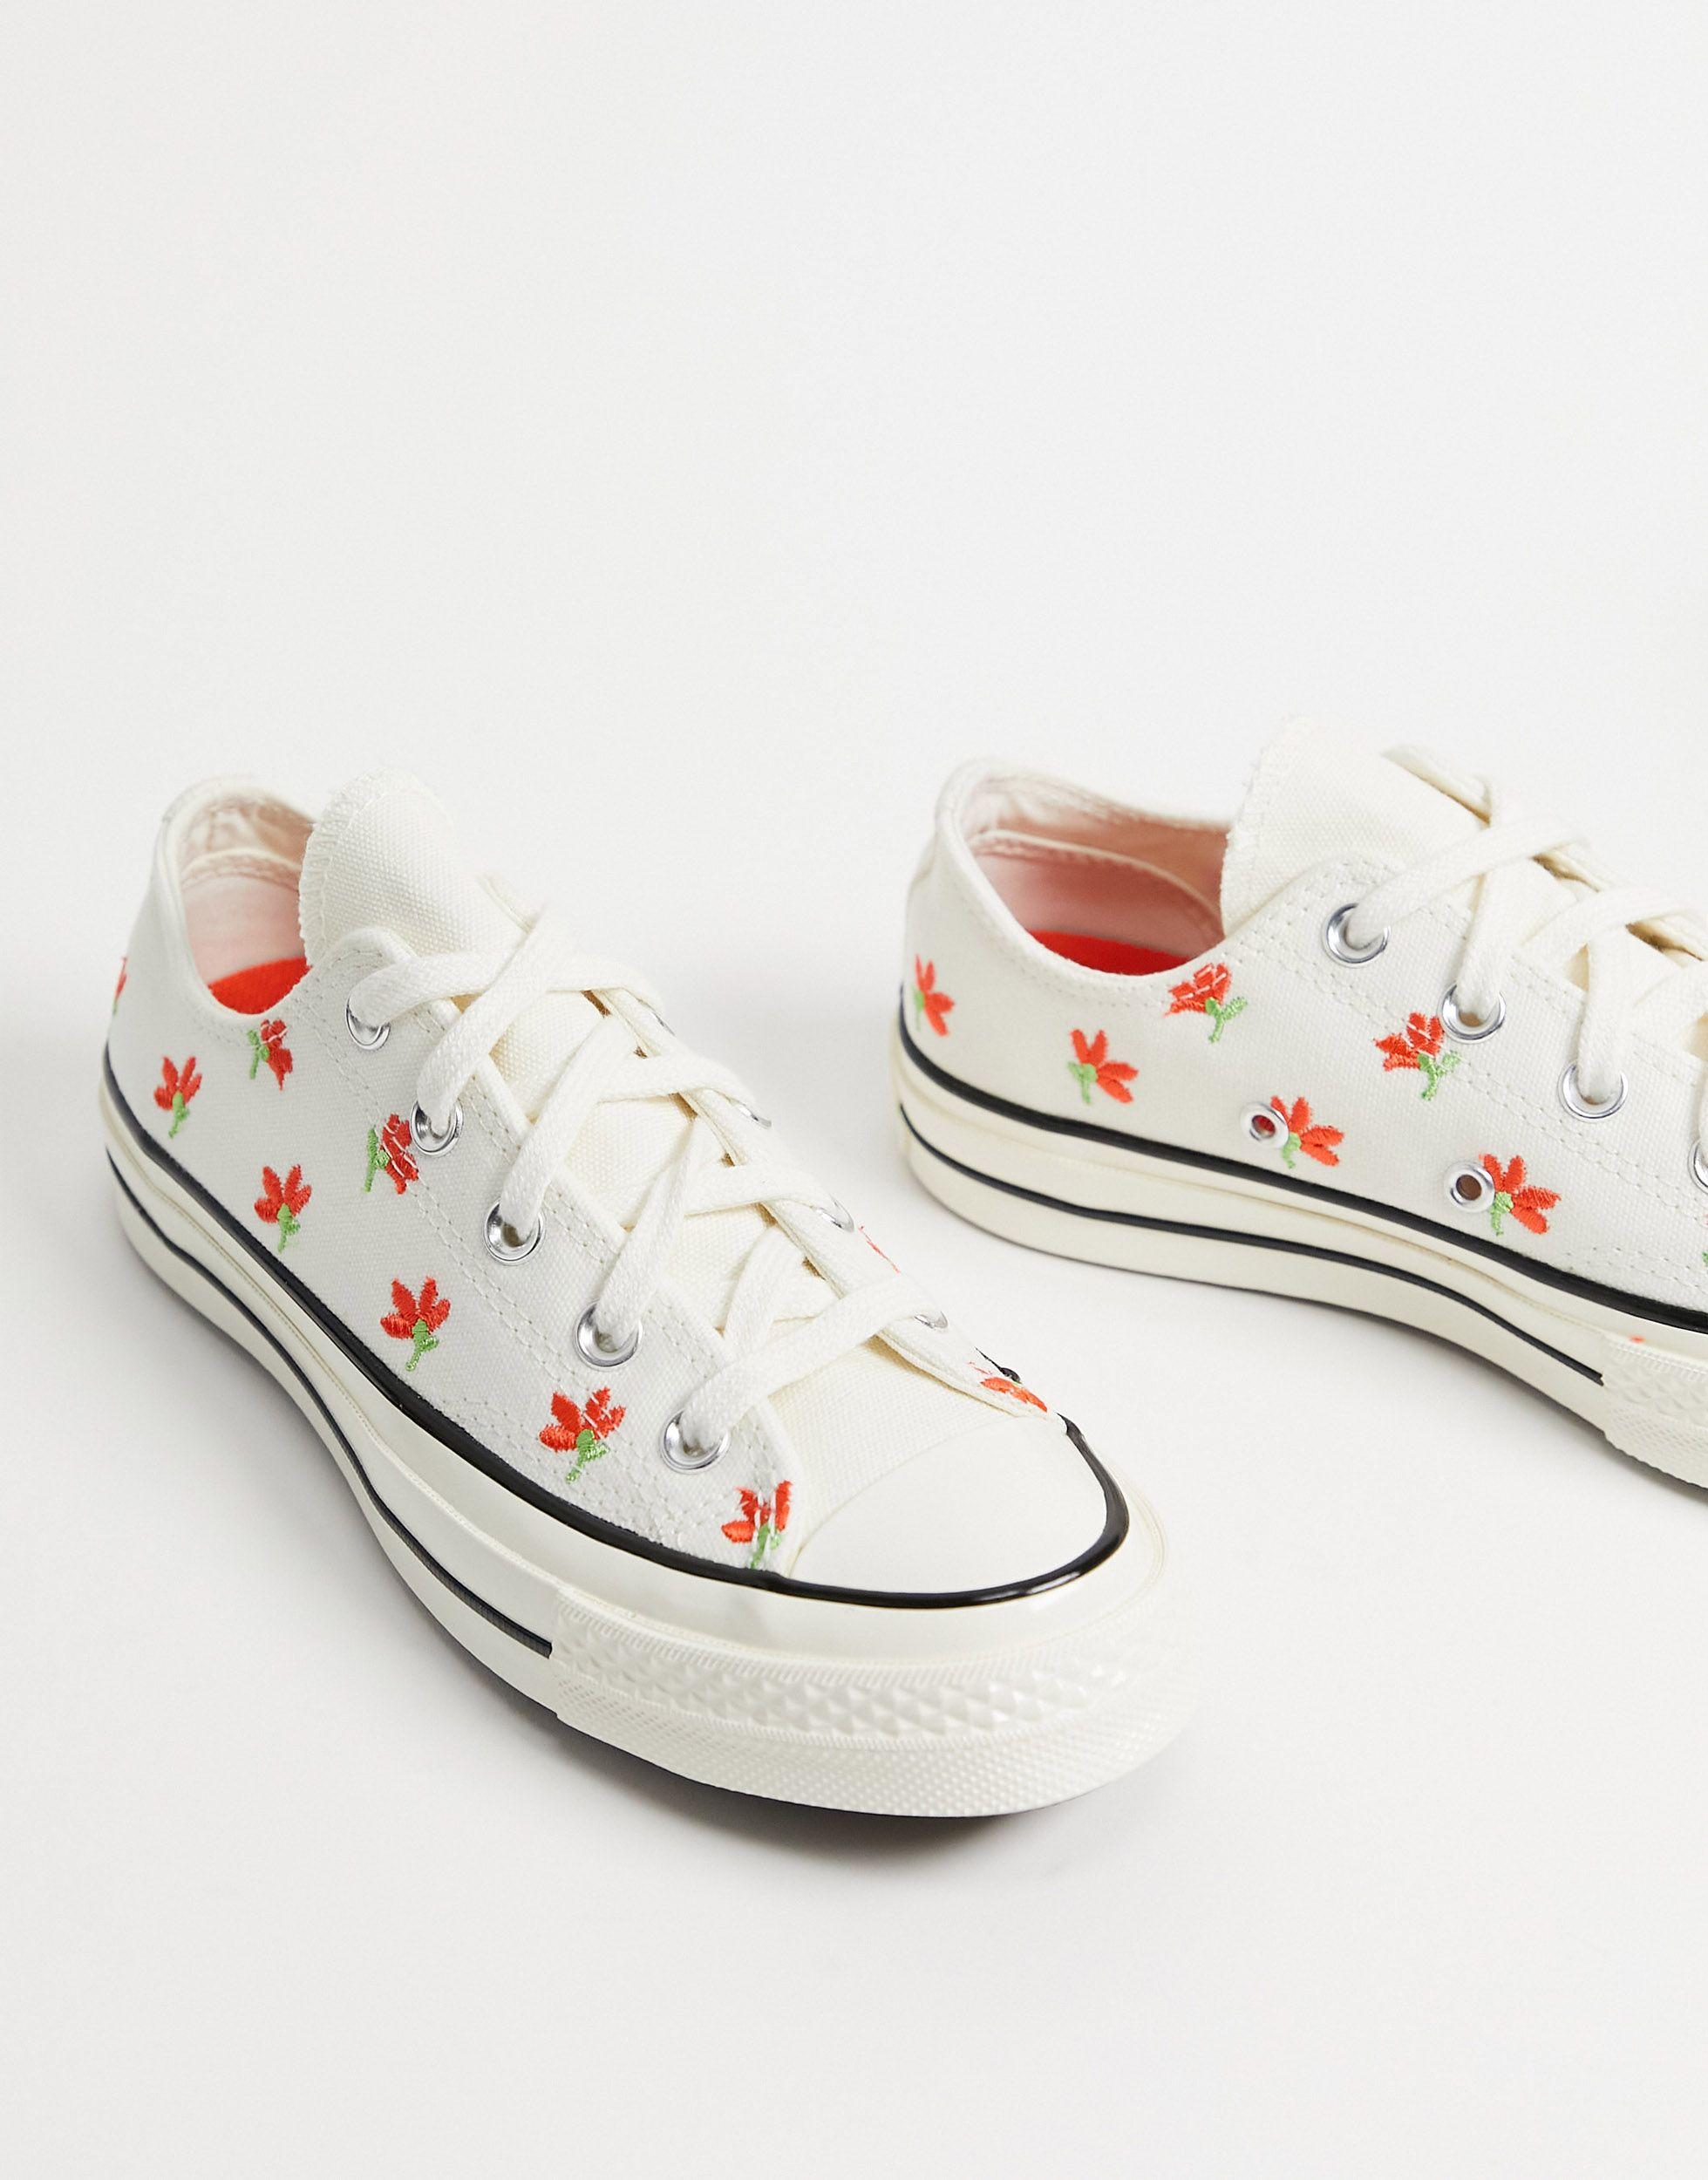 Converse Chuck 70 Low Floral Embroidered Trainers in White | Lyst